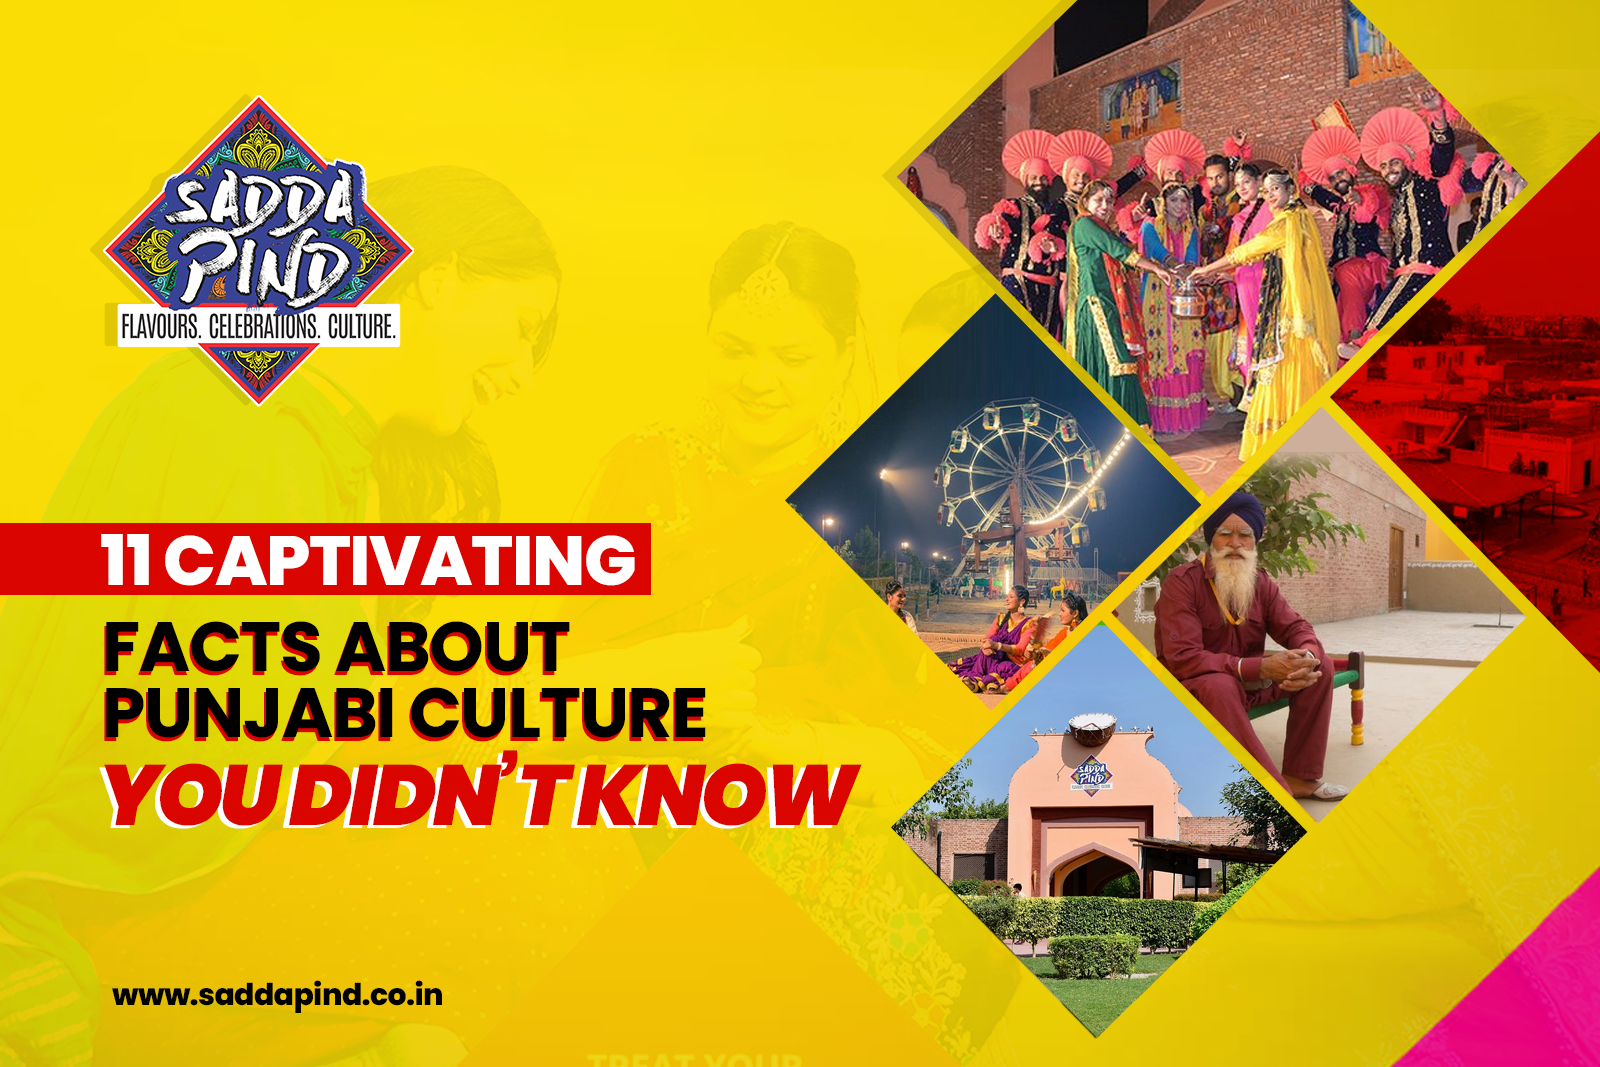 11 Captivating Facts About Punjabi Culture You Didn't Know